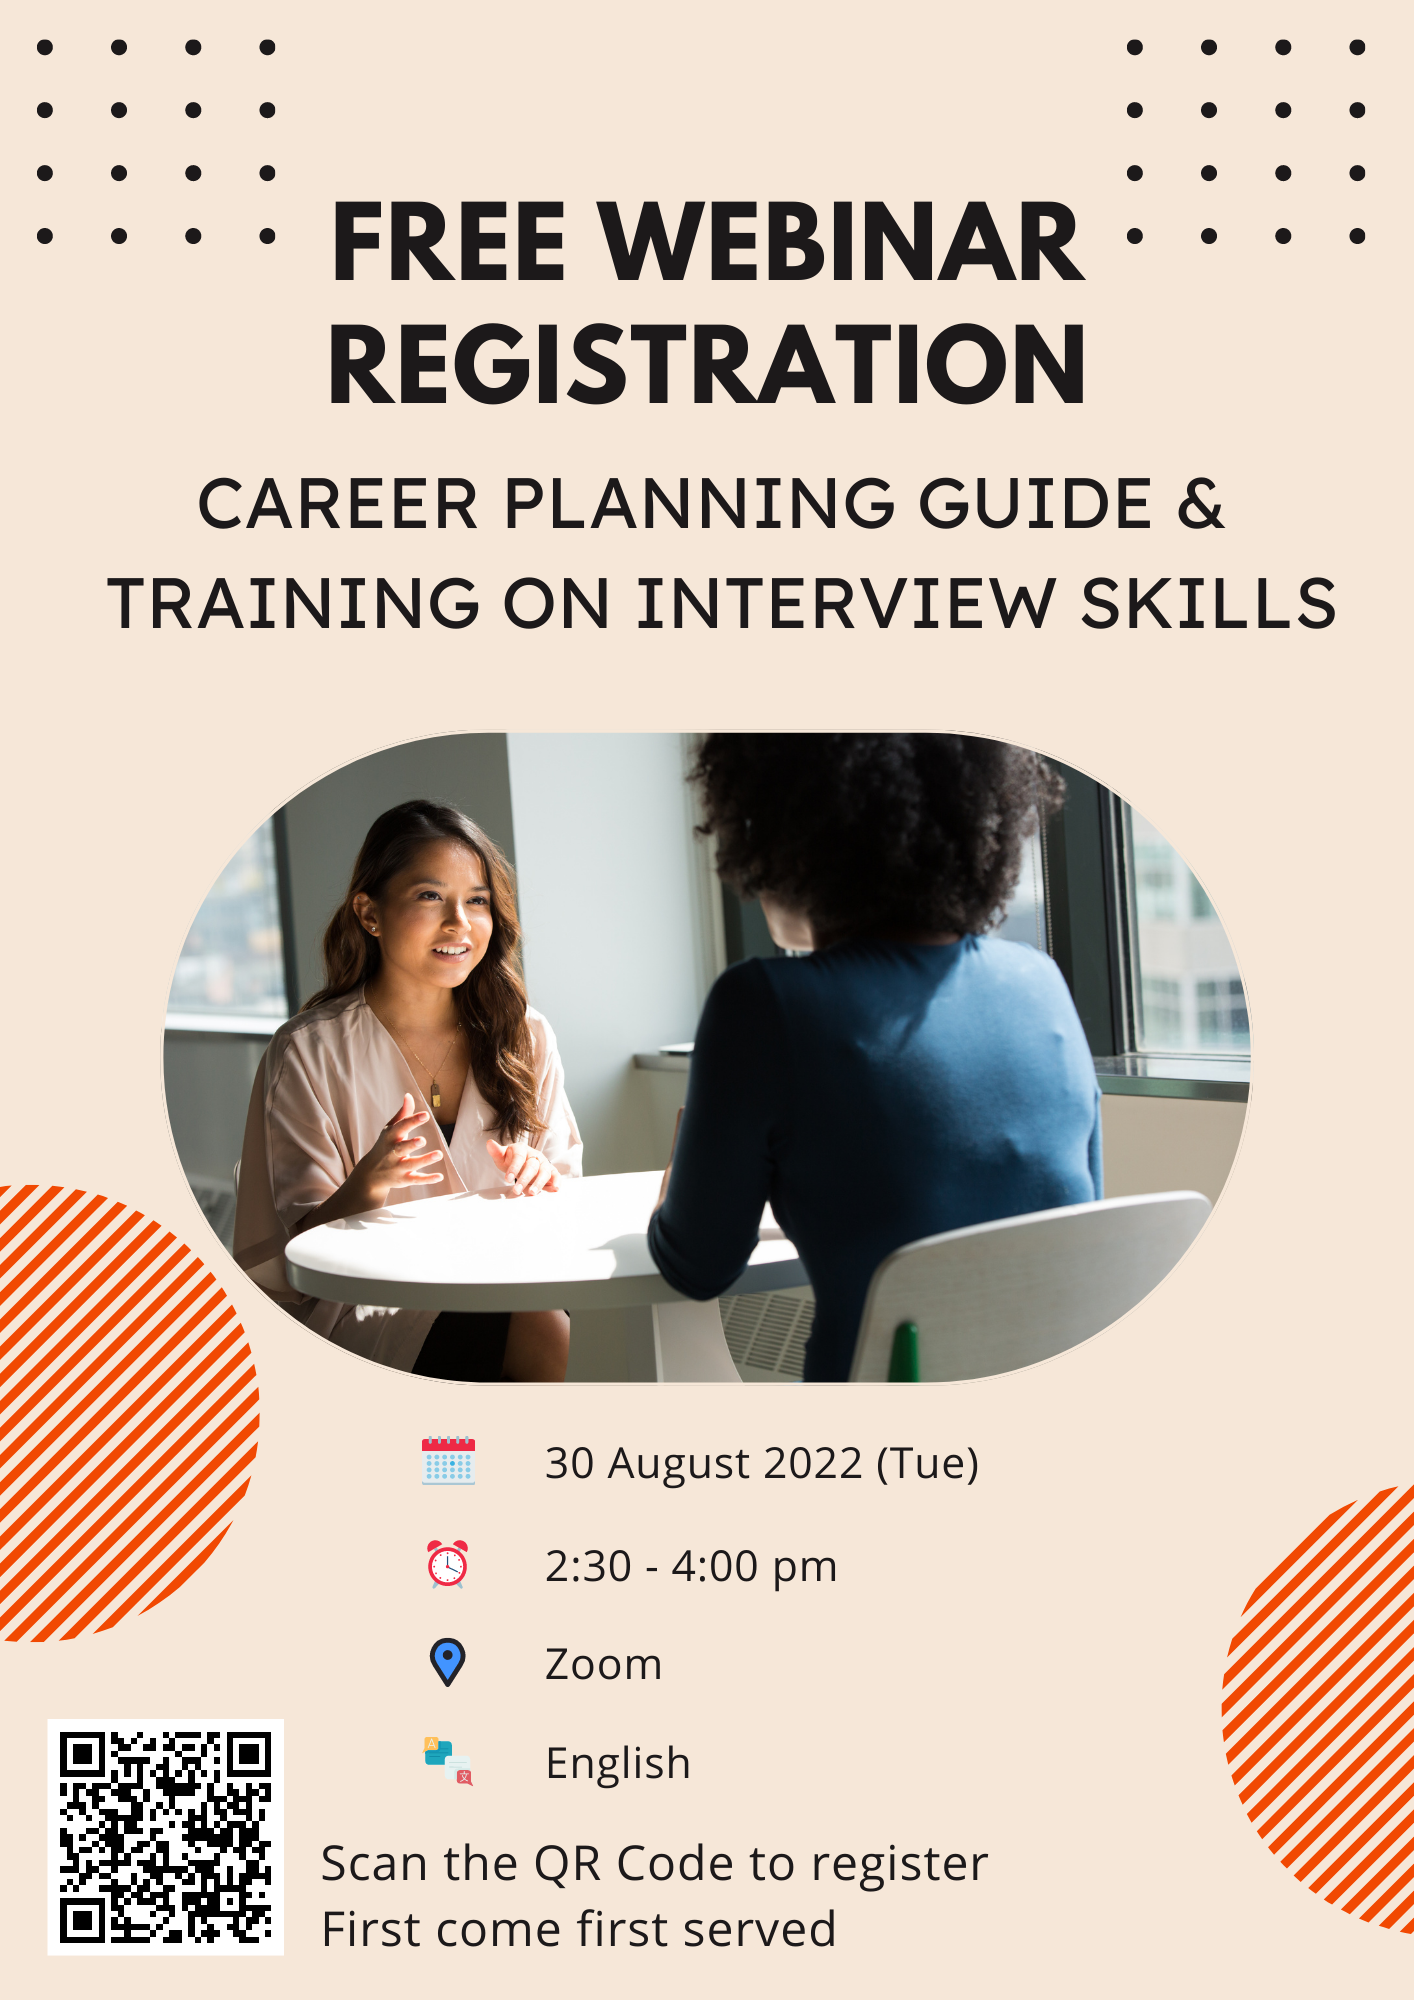 Career Planning Guide Training on Interview Skills 30 Aug 2022